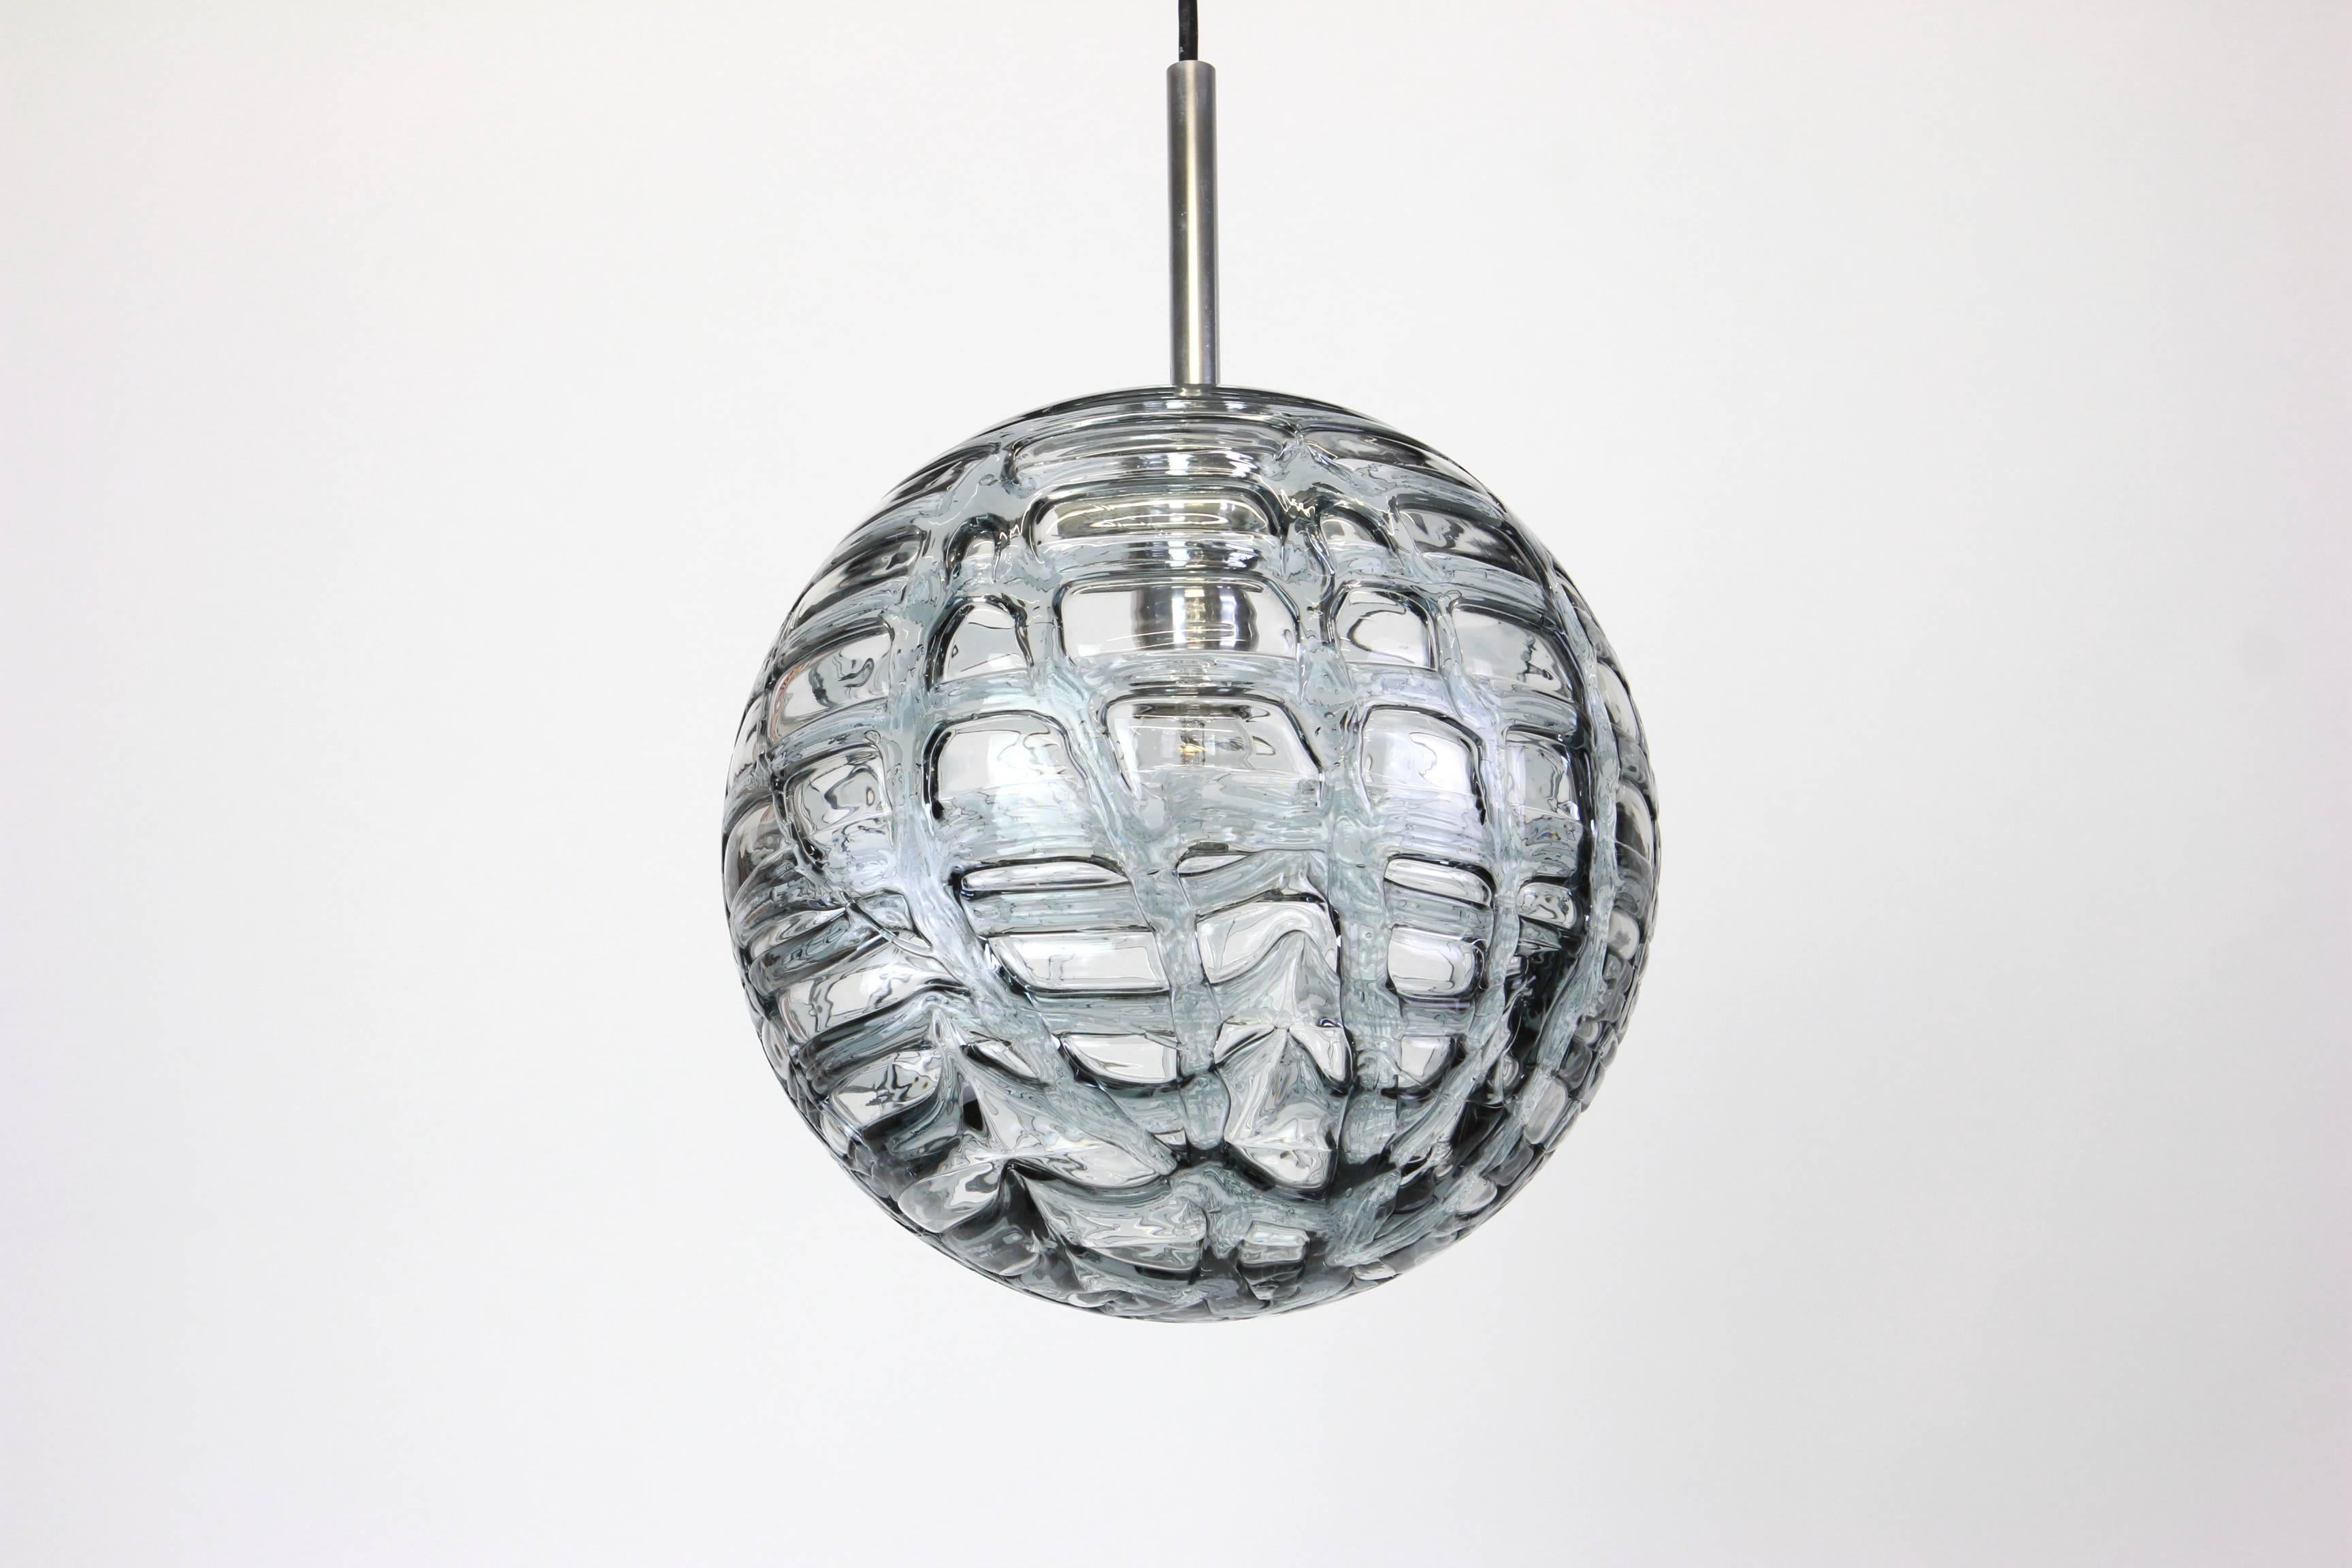 Doria ceiling light with large volcanic Murano glass ball.
High quality of materials, gives a wonderful light effect when it is on.

Sockets: One E27 standard bulbs. Max 80 watt and function on voltage from 110 till 240 volts. (For USA, UK,